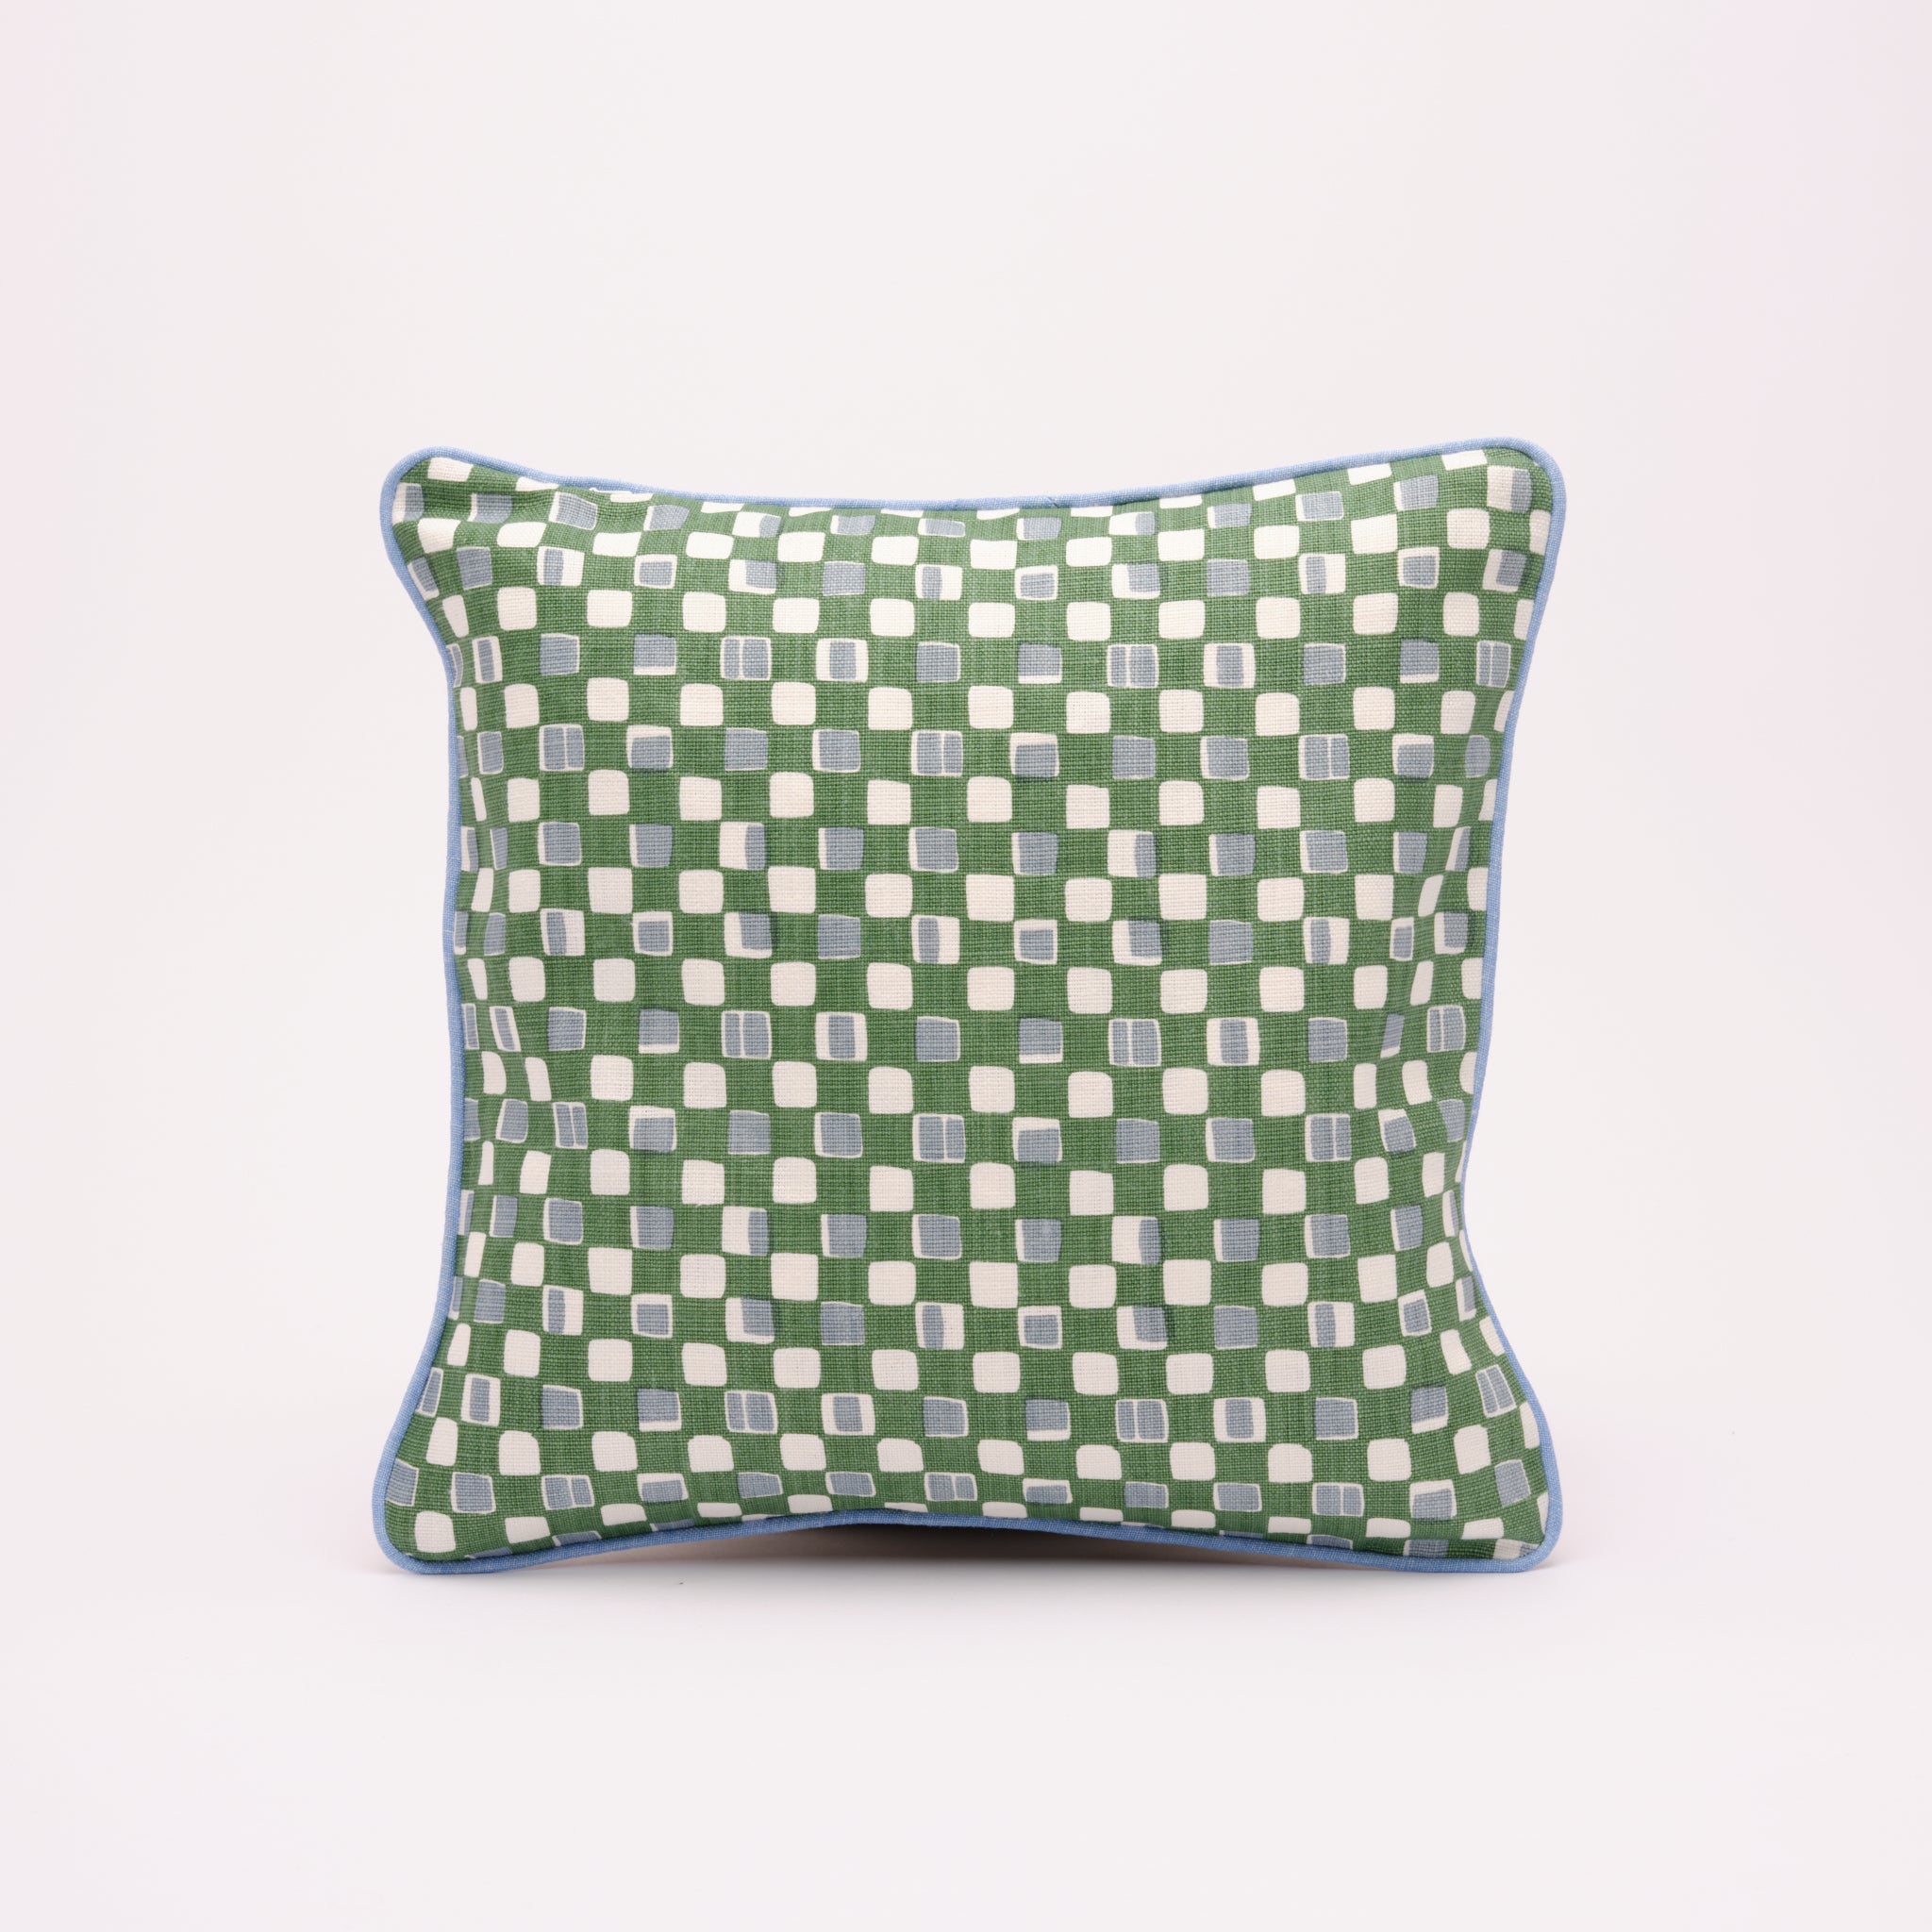 Square Cushion with Blue Contrast Piping (Green/Brown)